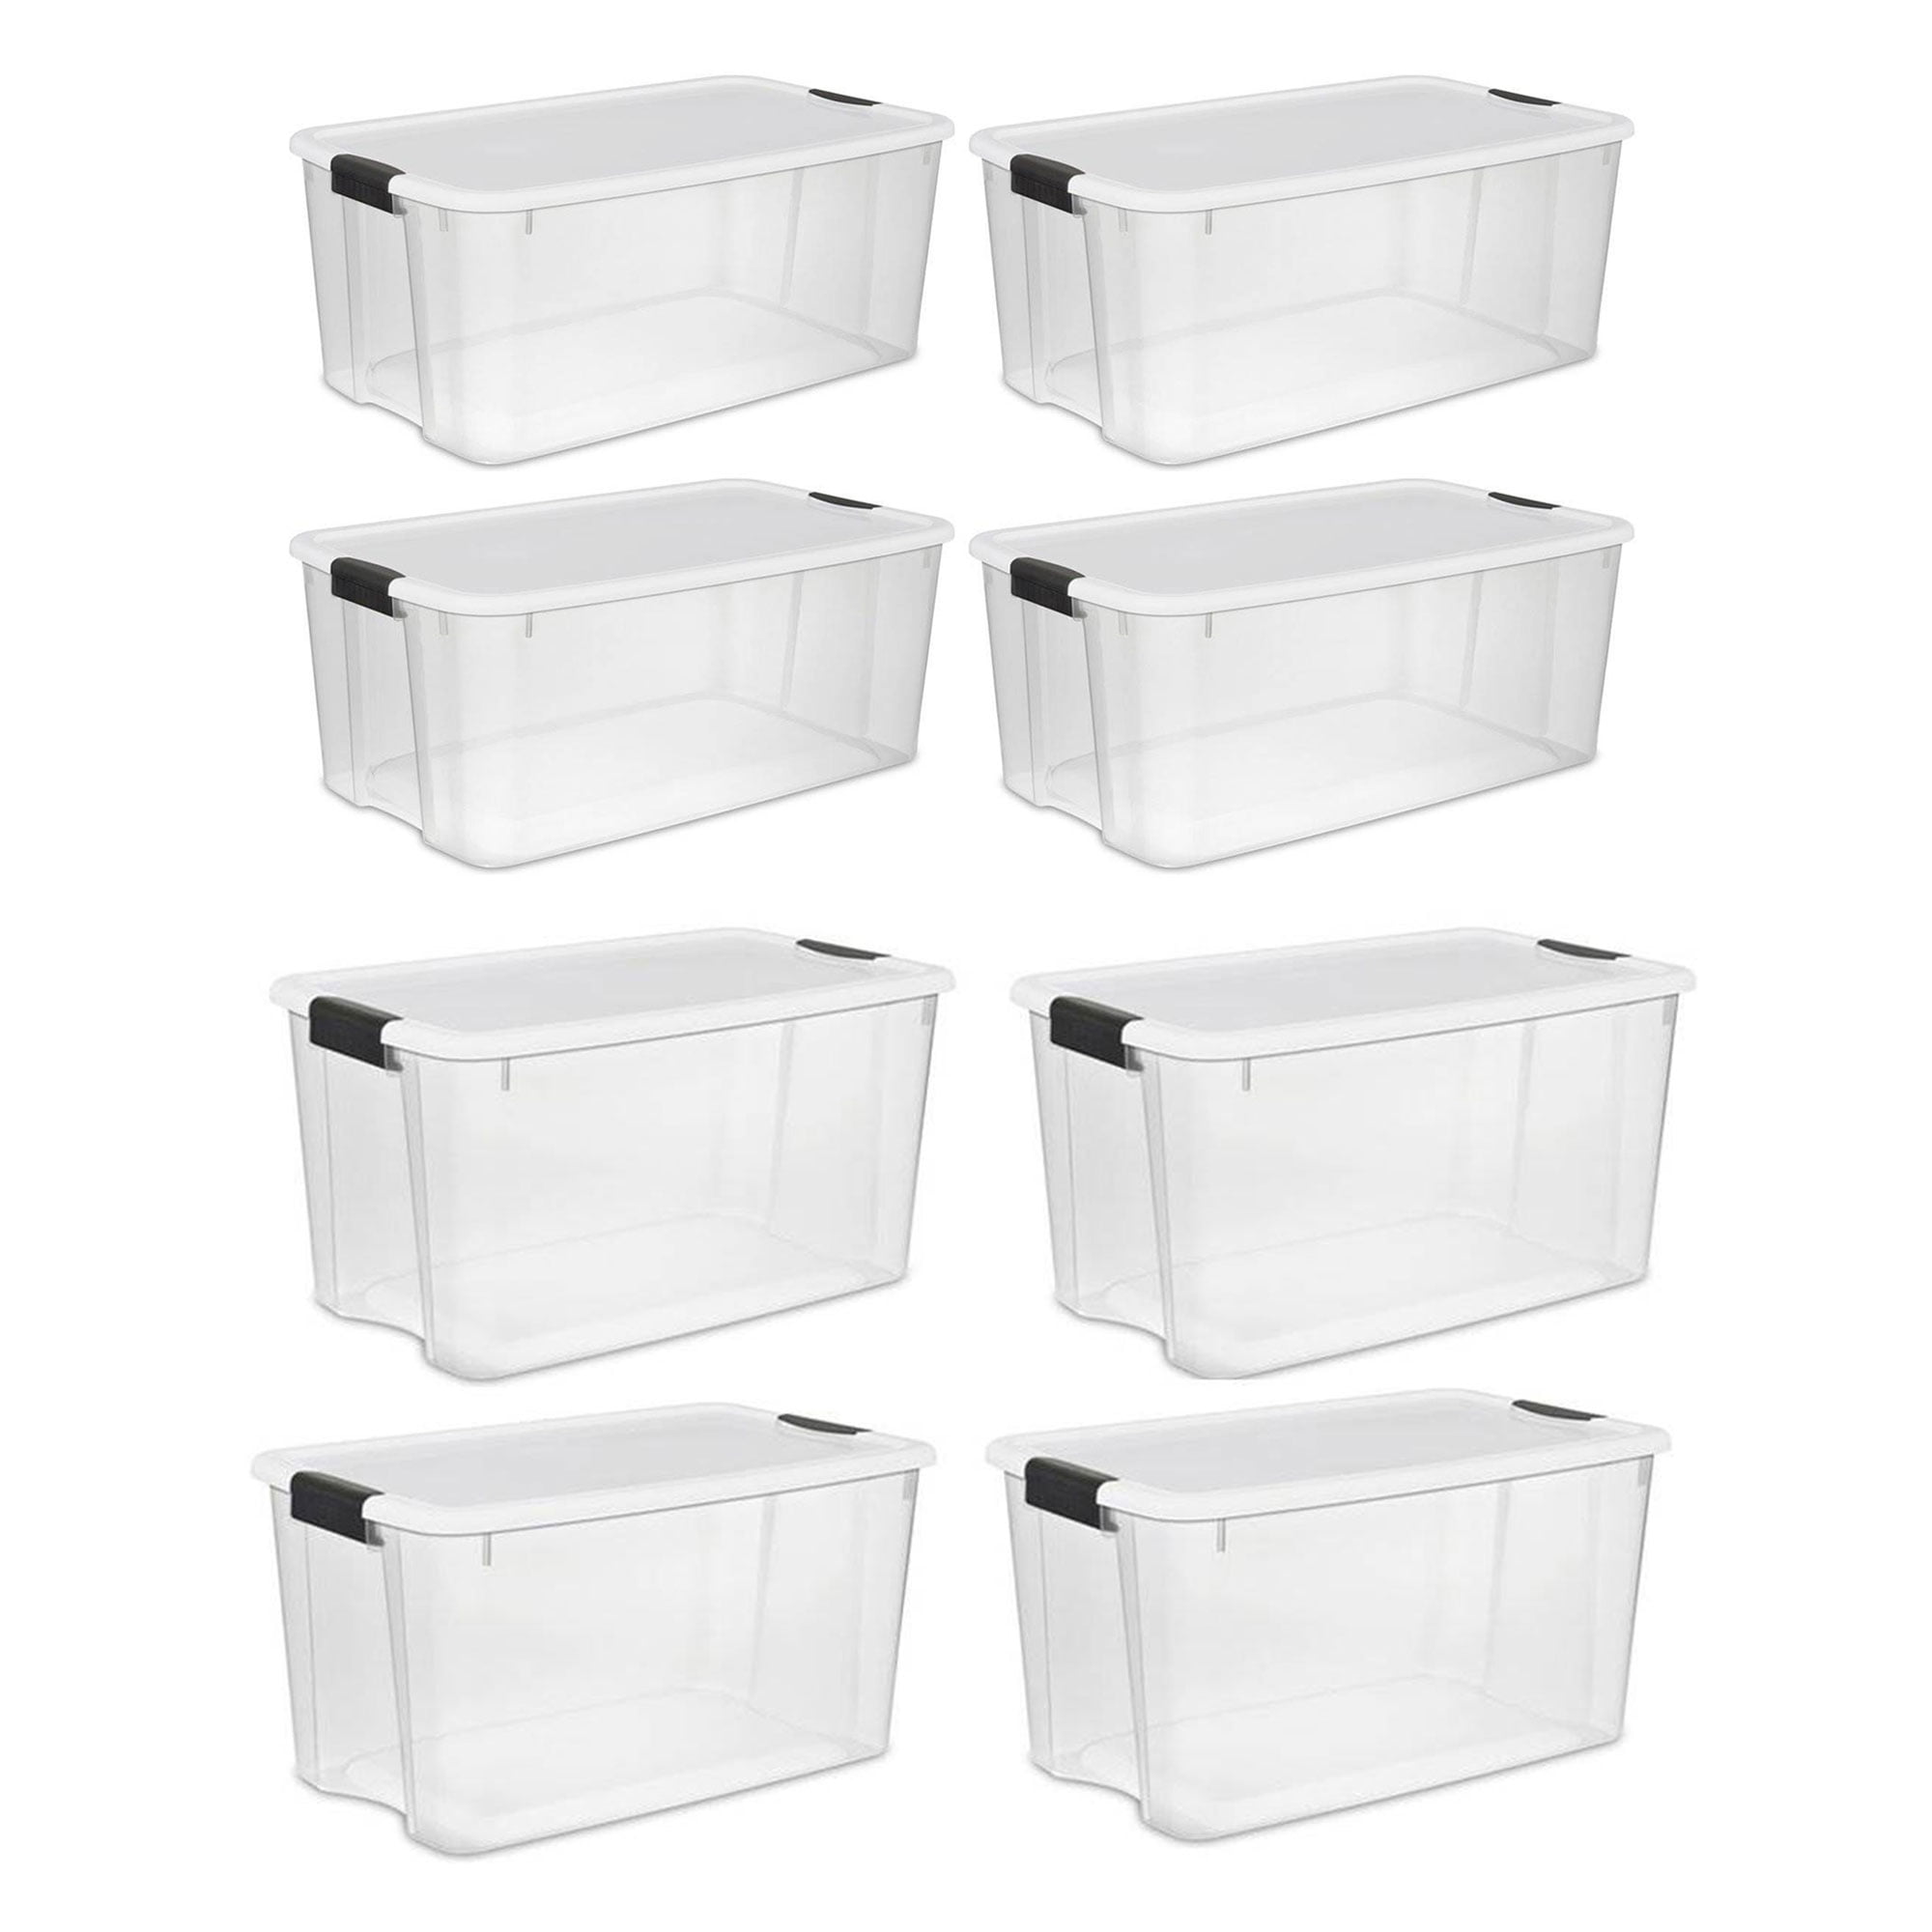 Sterilite Storage Containers Bins with Wheels Garage Large Tote Stackable 4 Pack 